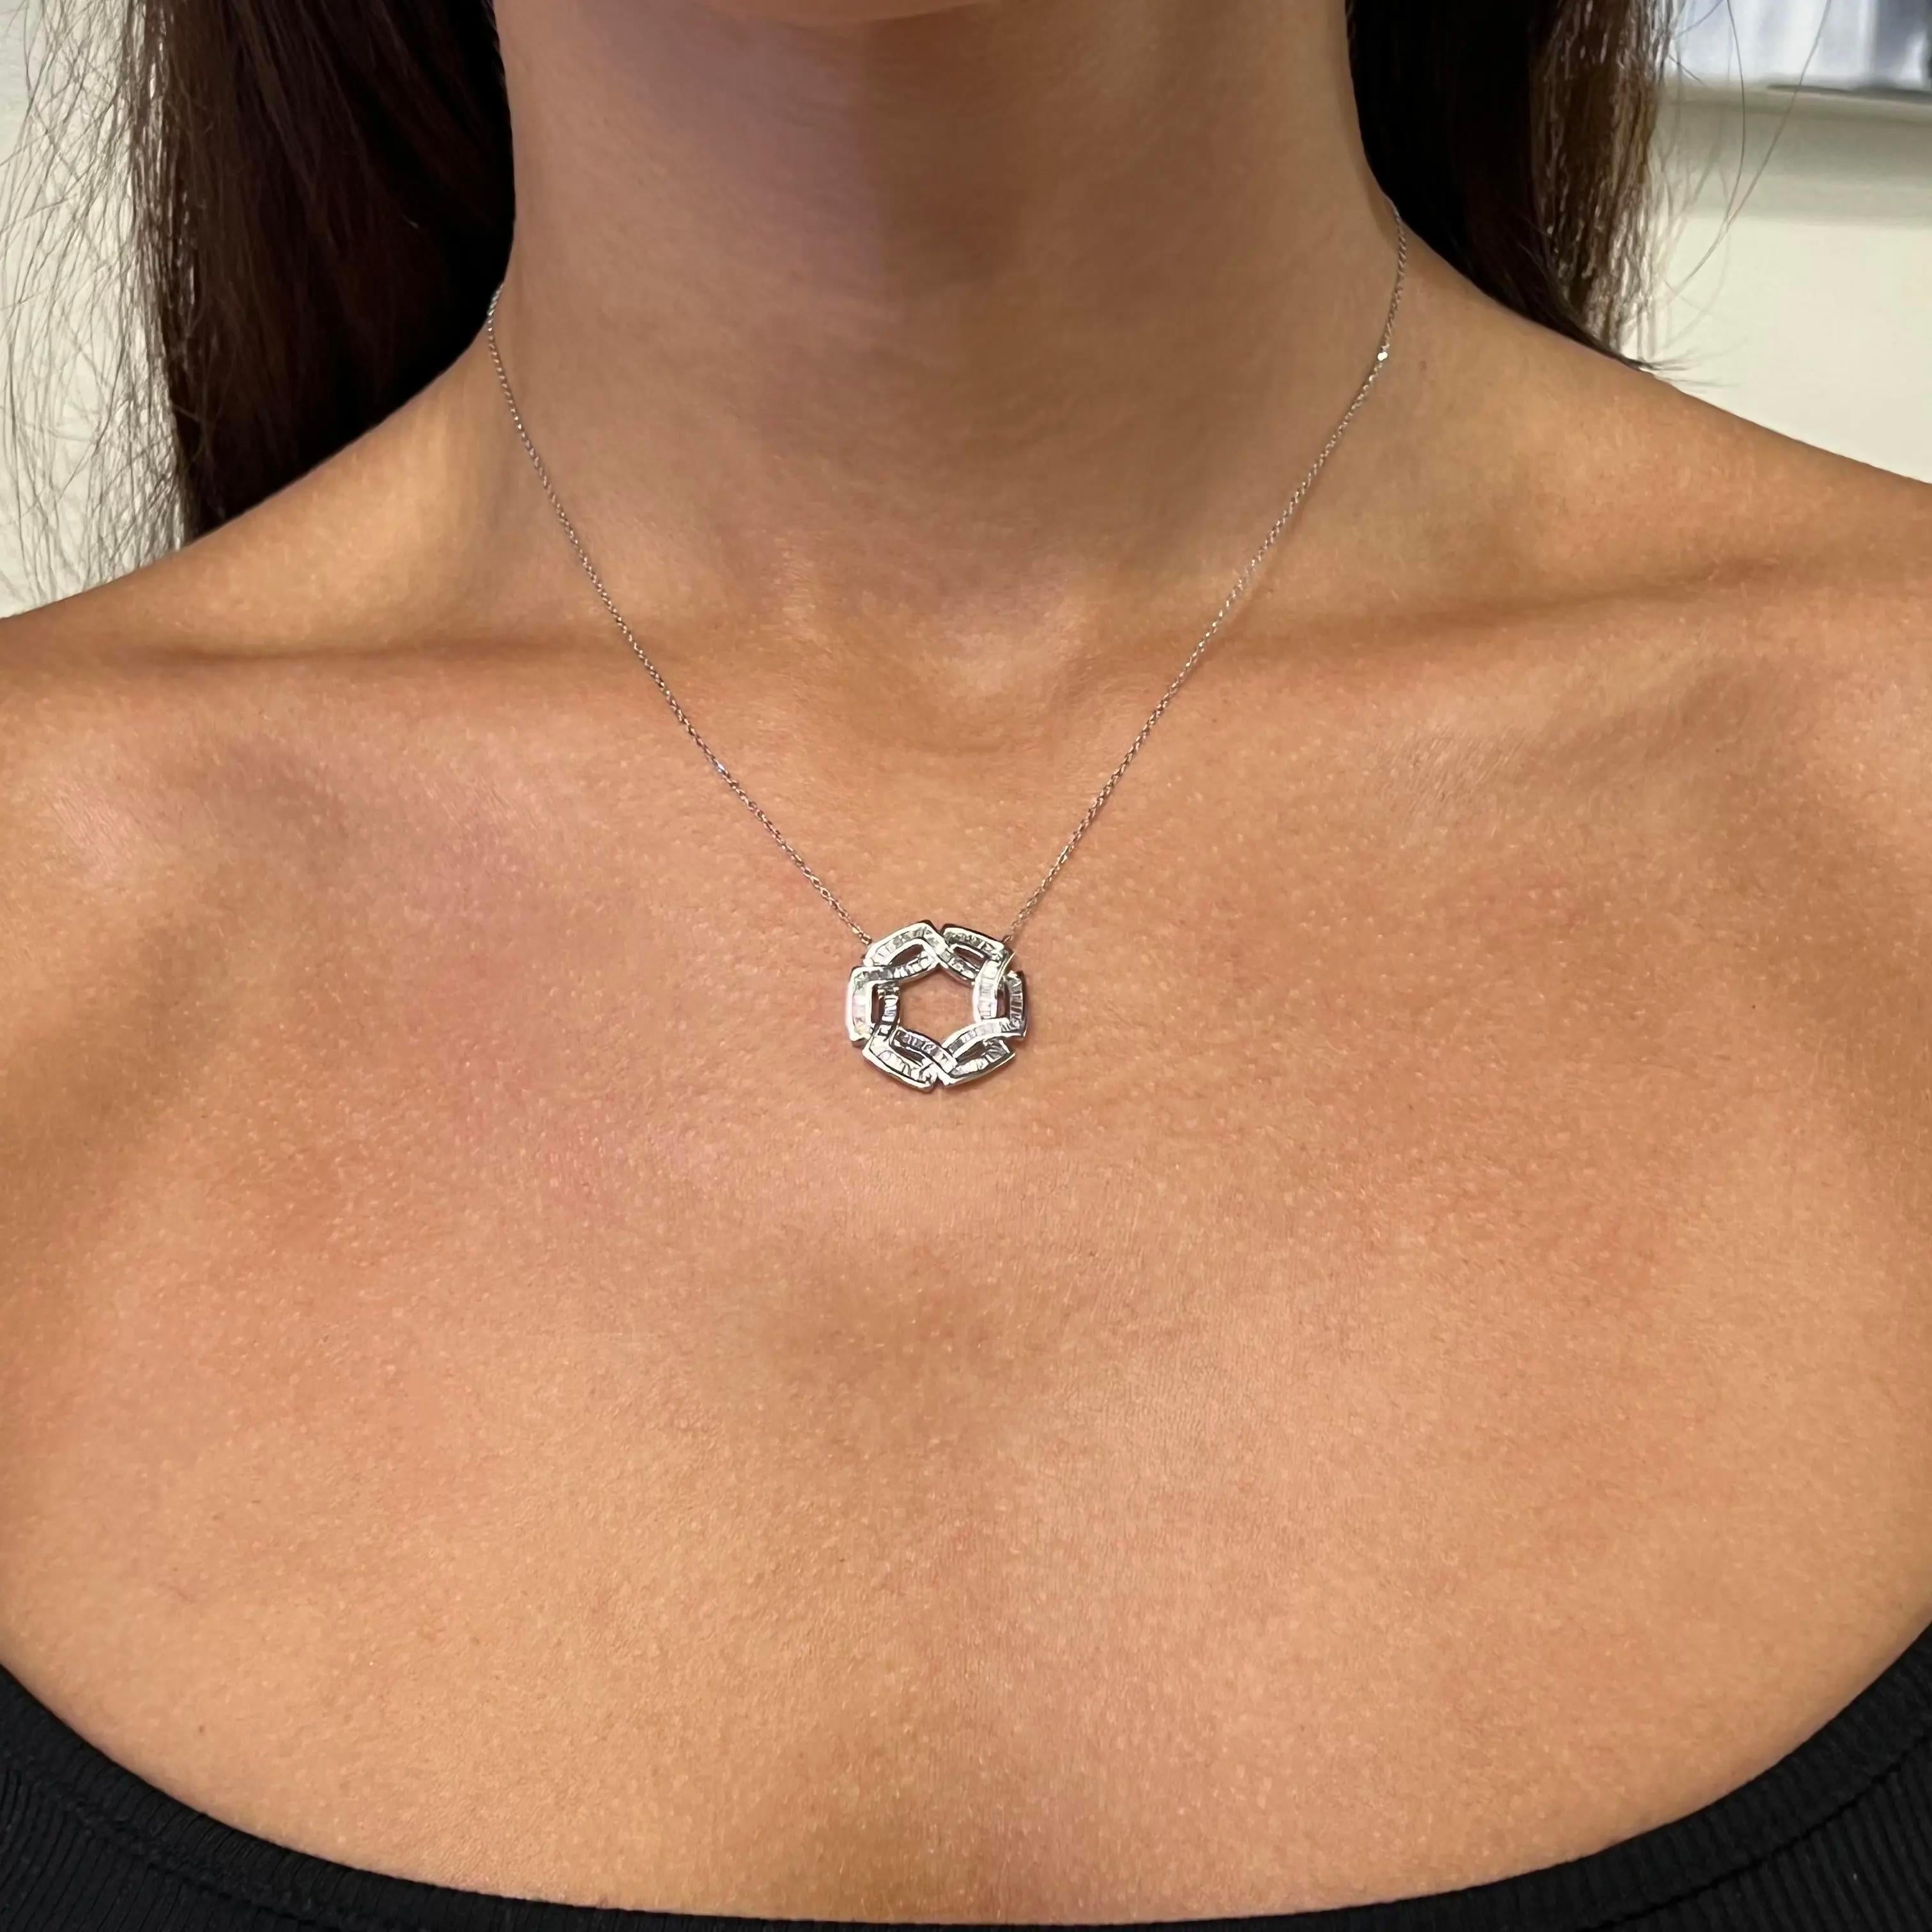 Secret Circles Baguette Diamond Pendant Necklace 14K White Gold 0.60Cttw In New Condition For Sale In New York, NY